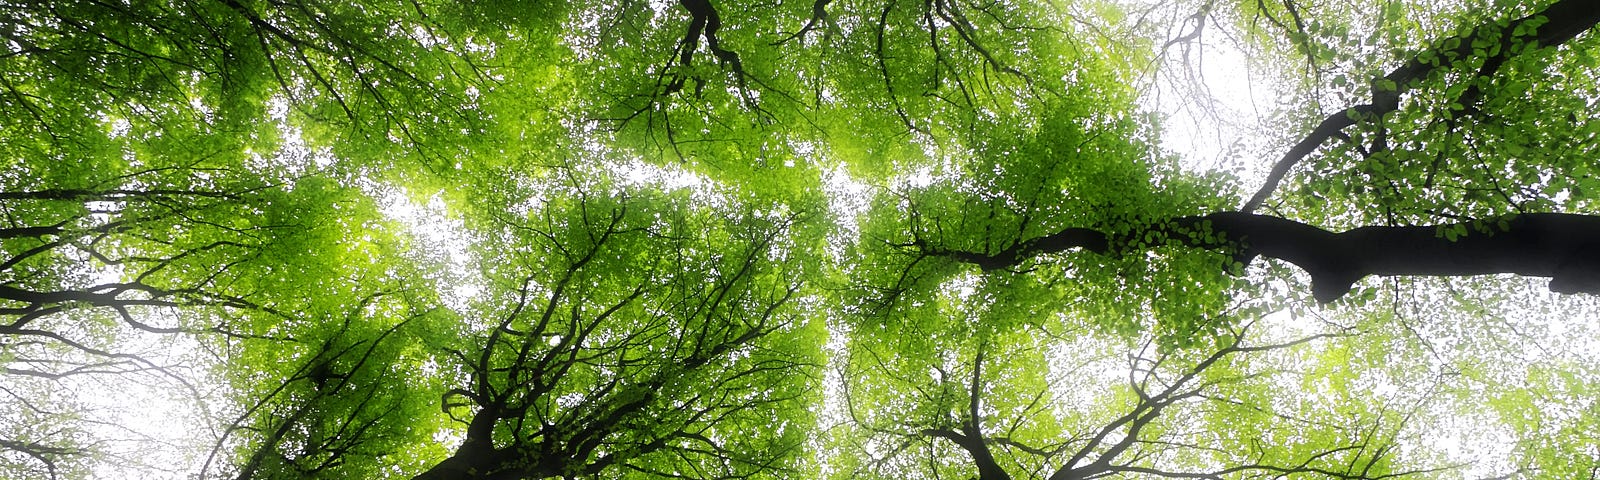 Looking up at a forest with tall trees appearing to meet in the centre of the page